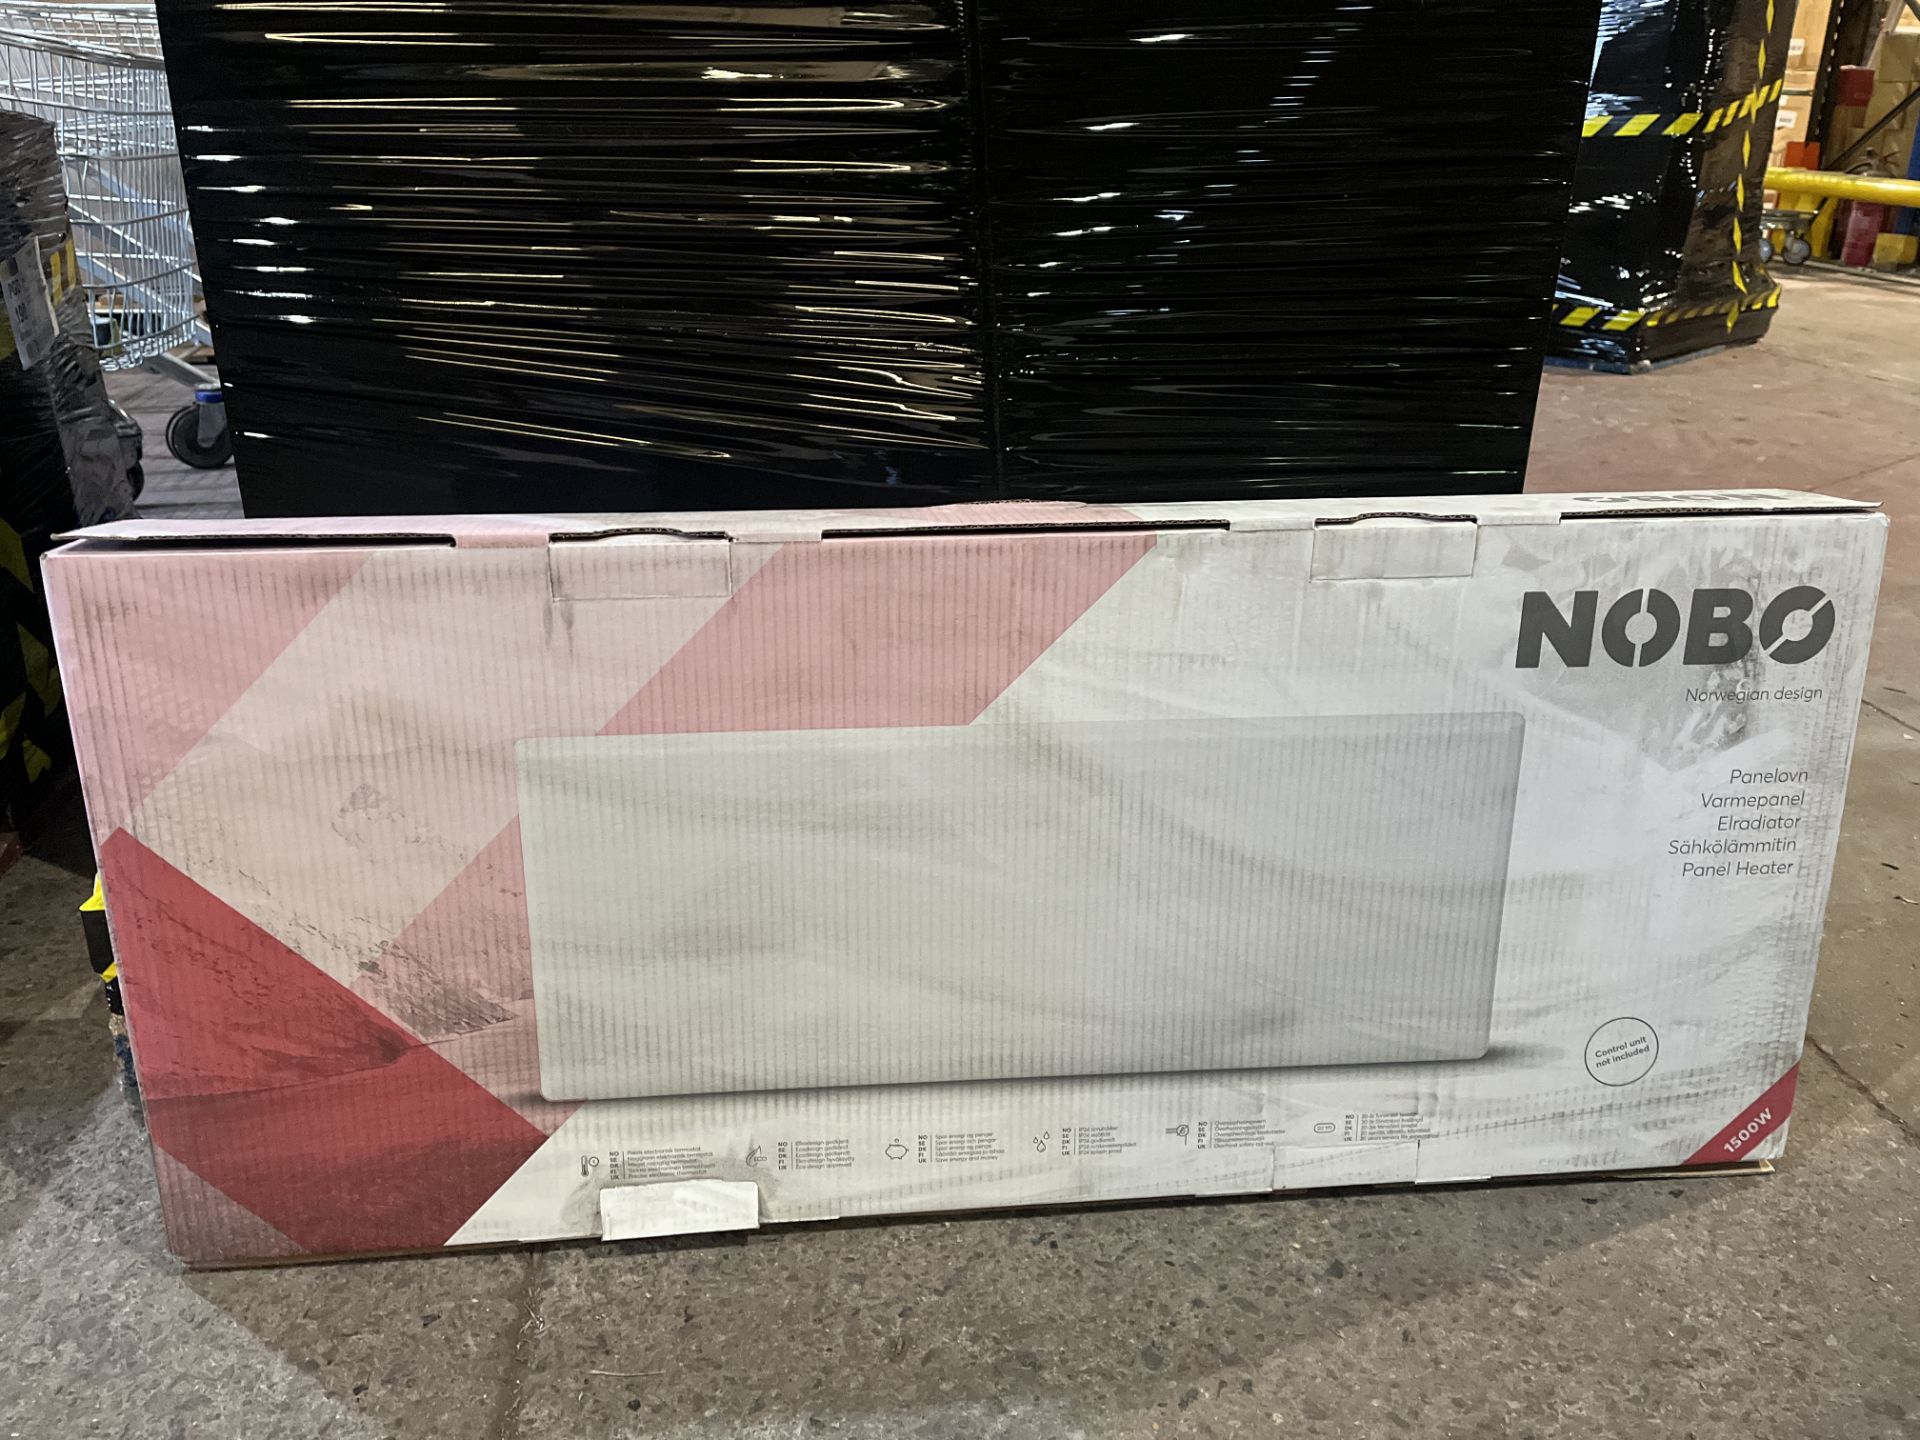 NEW BOXED NOBO PANEL HEATER. NTL4N. 1500W TOP OUTLET PANEL HEATER. ROW 1,4RACK